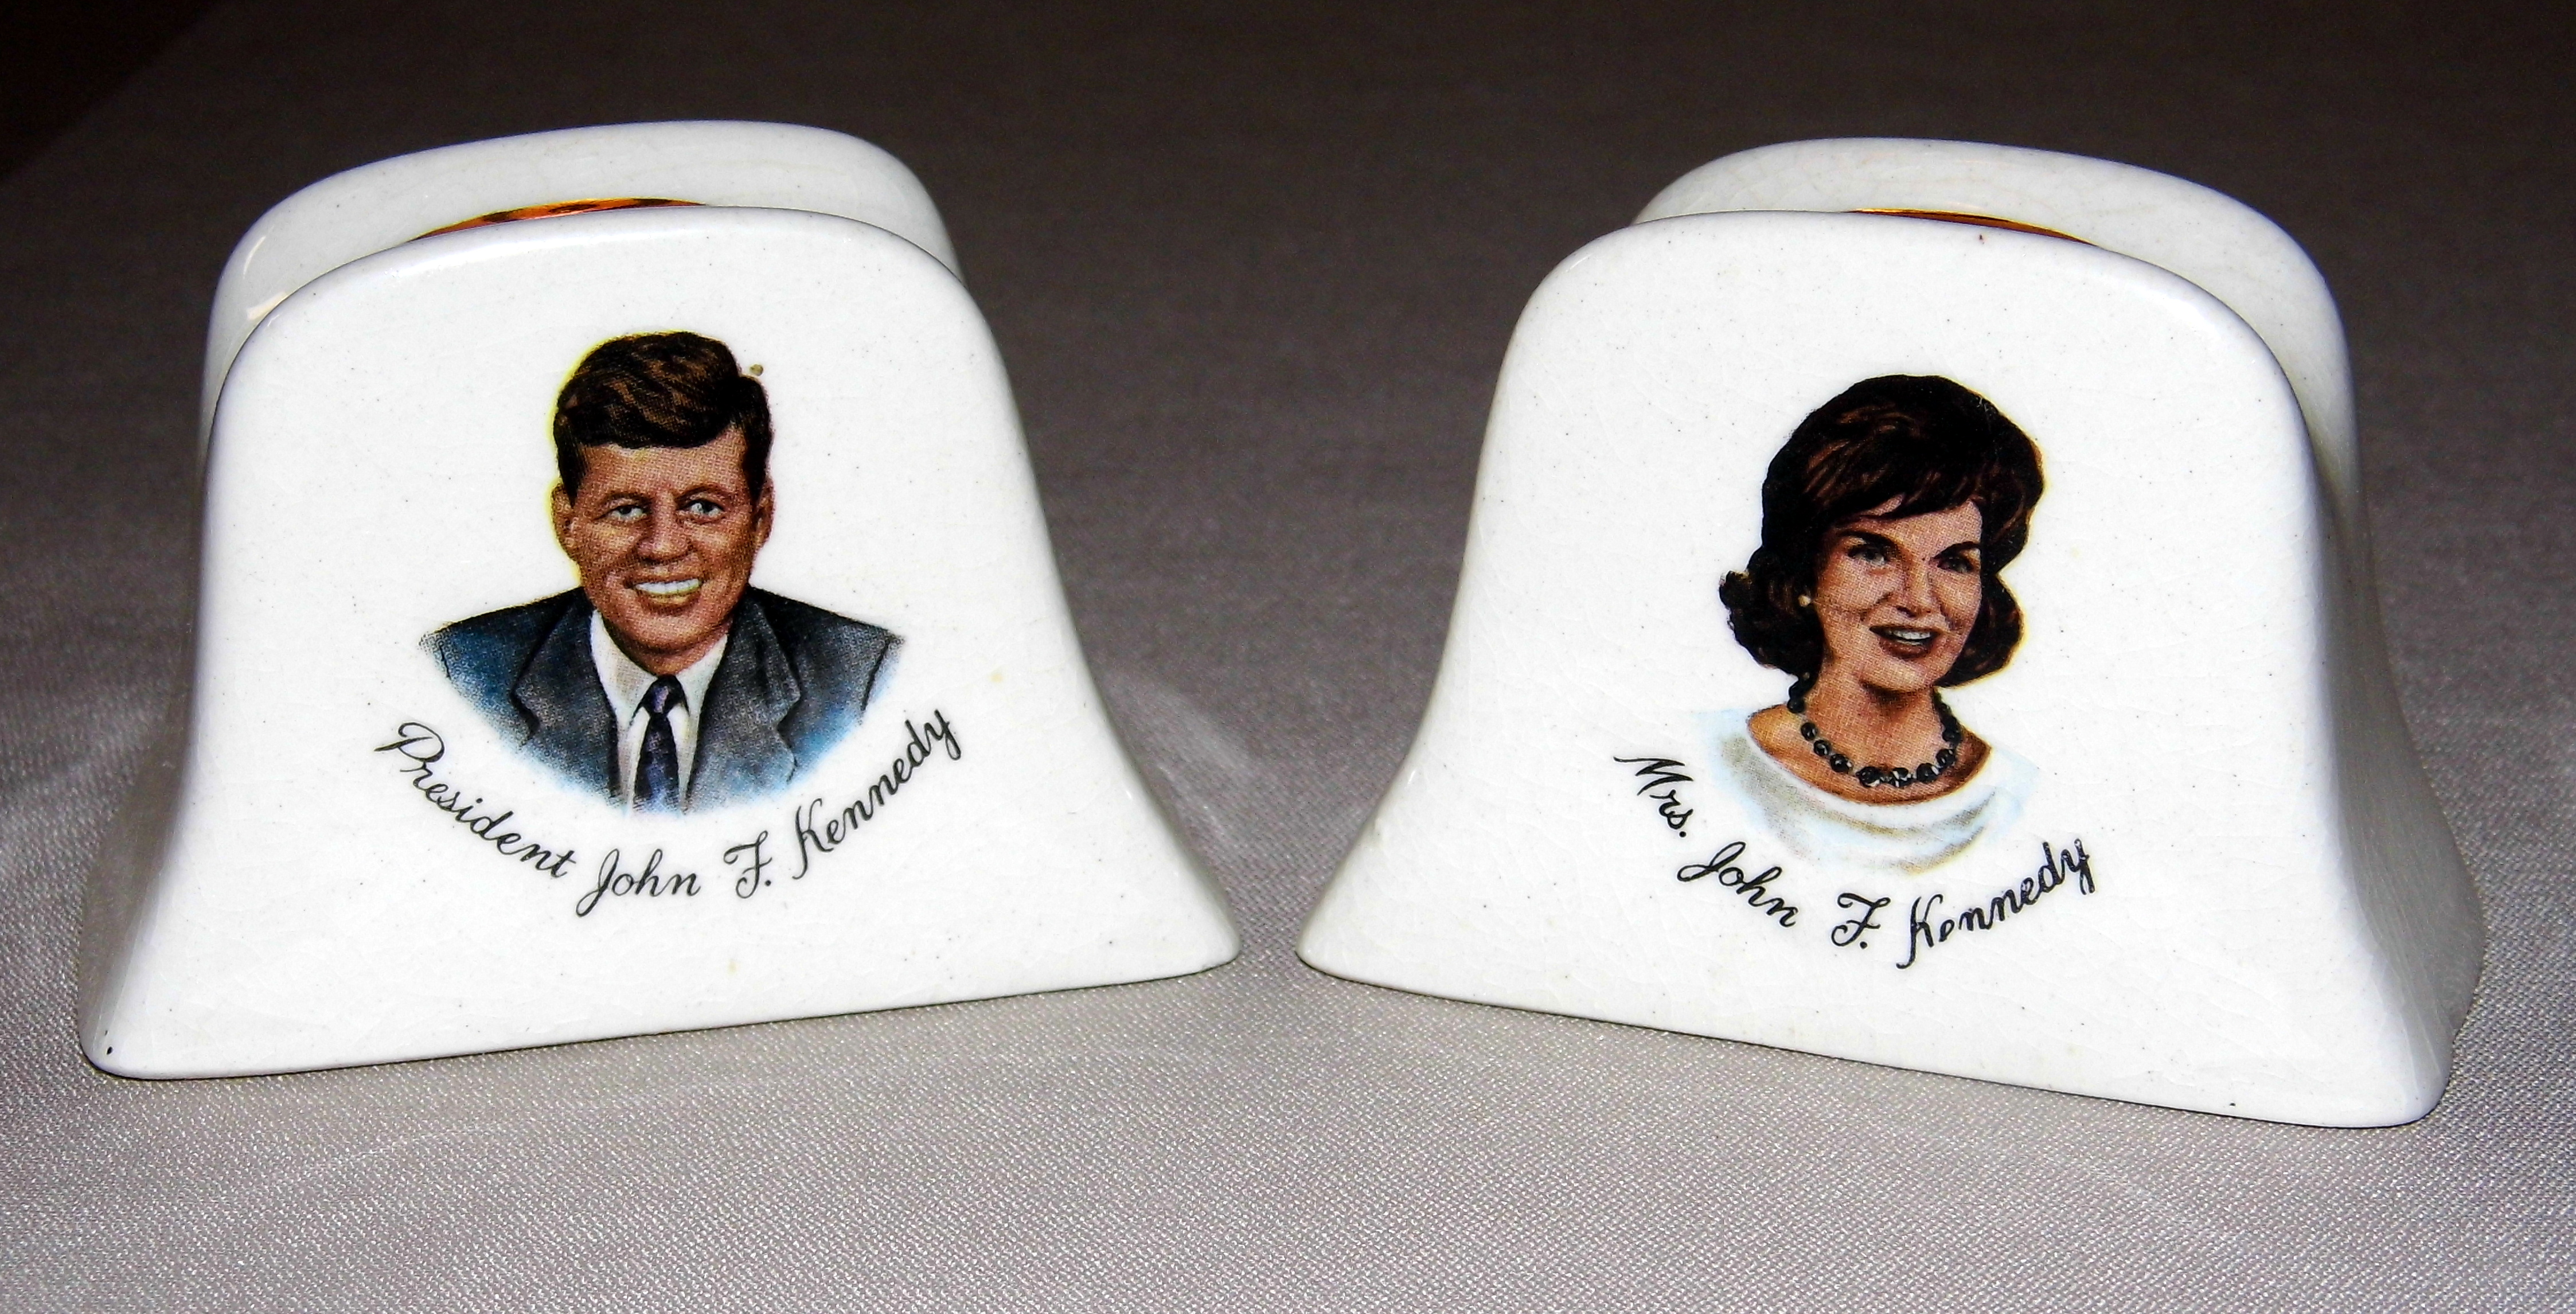 https://upload.wikimedia.org/wikipedia/commons/9/9b/Pair_of_Vintage_John_F._Kennedy_and_Jackie_Kennedy_Salt_and_Pepper_Shakers_%2811121474114%29.jpg